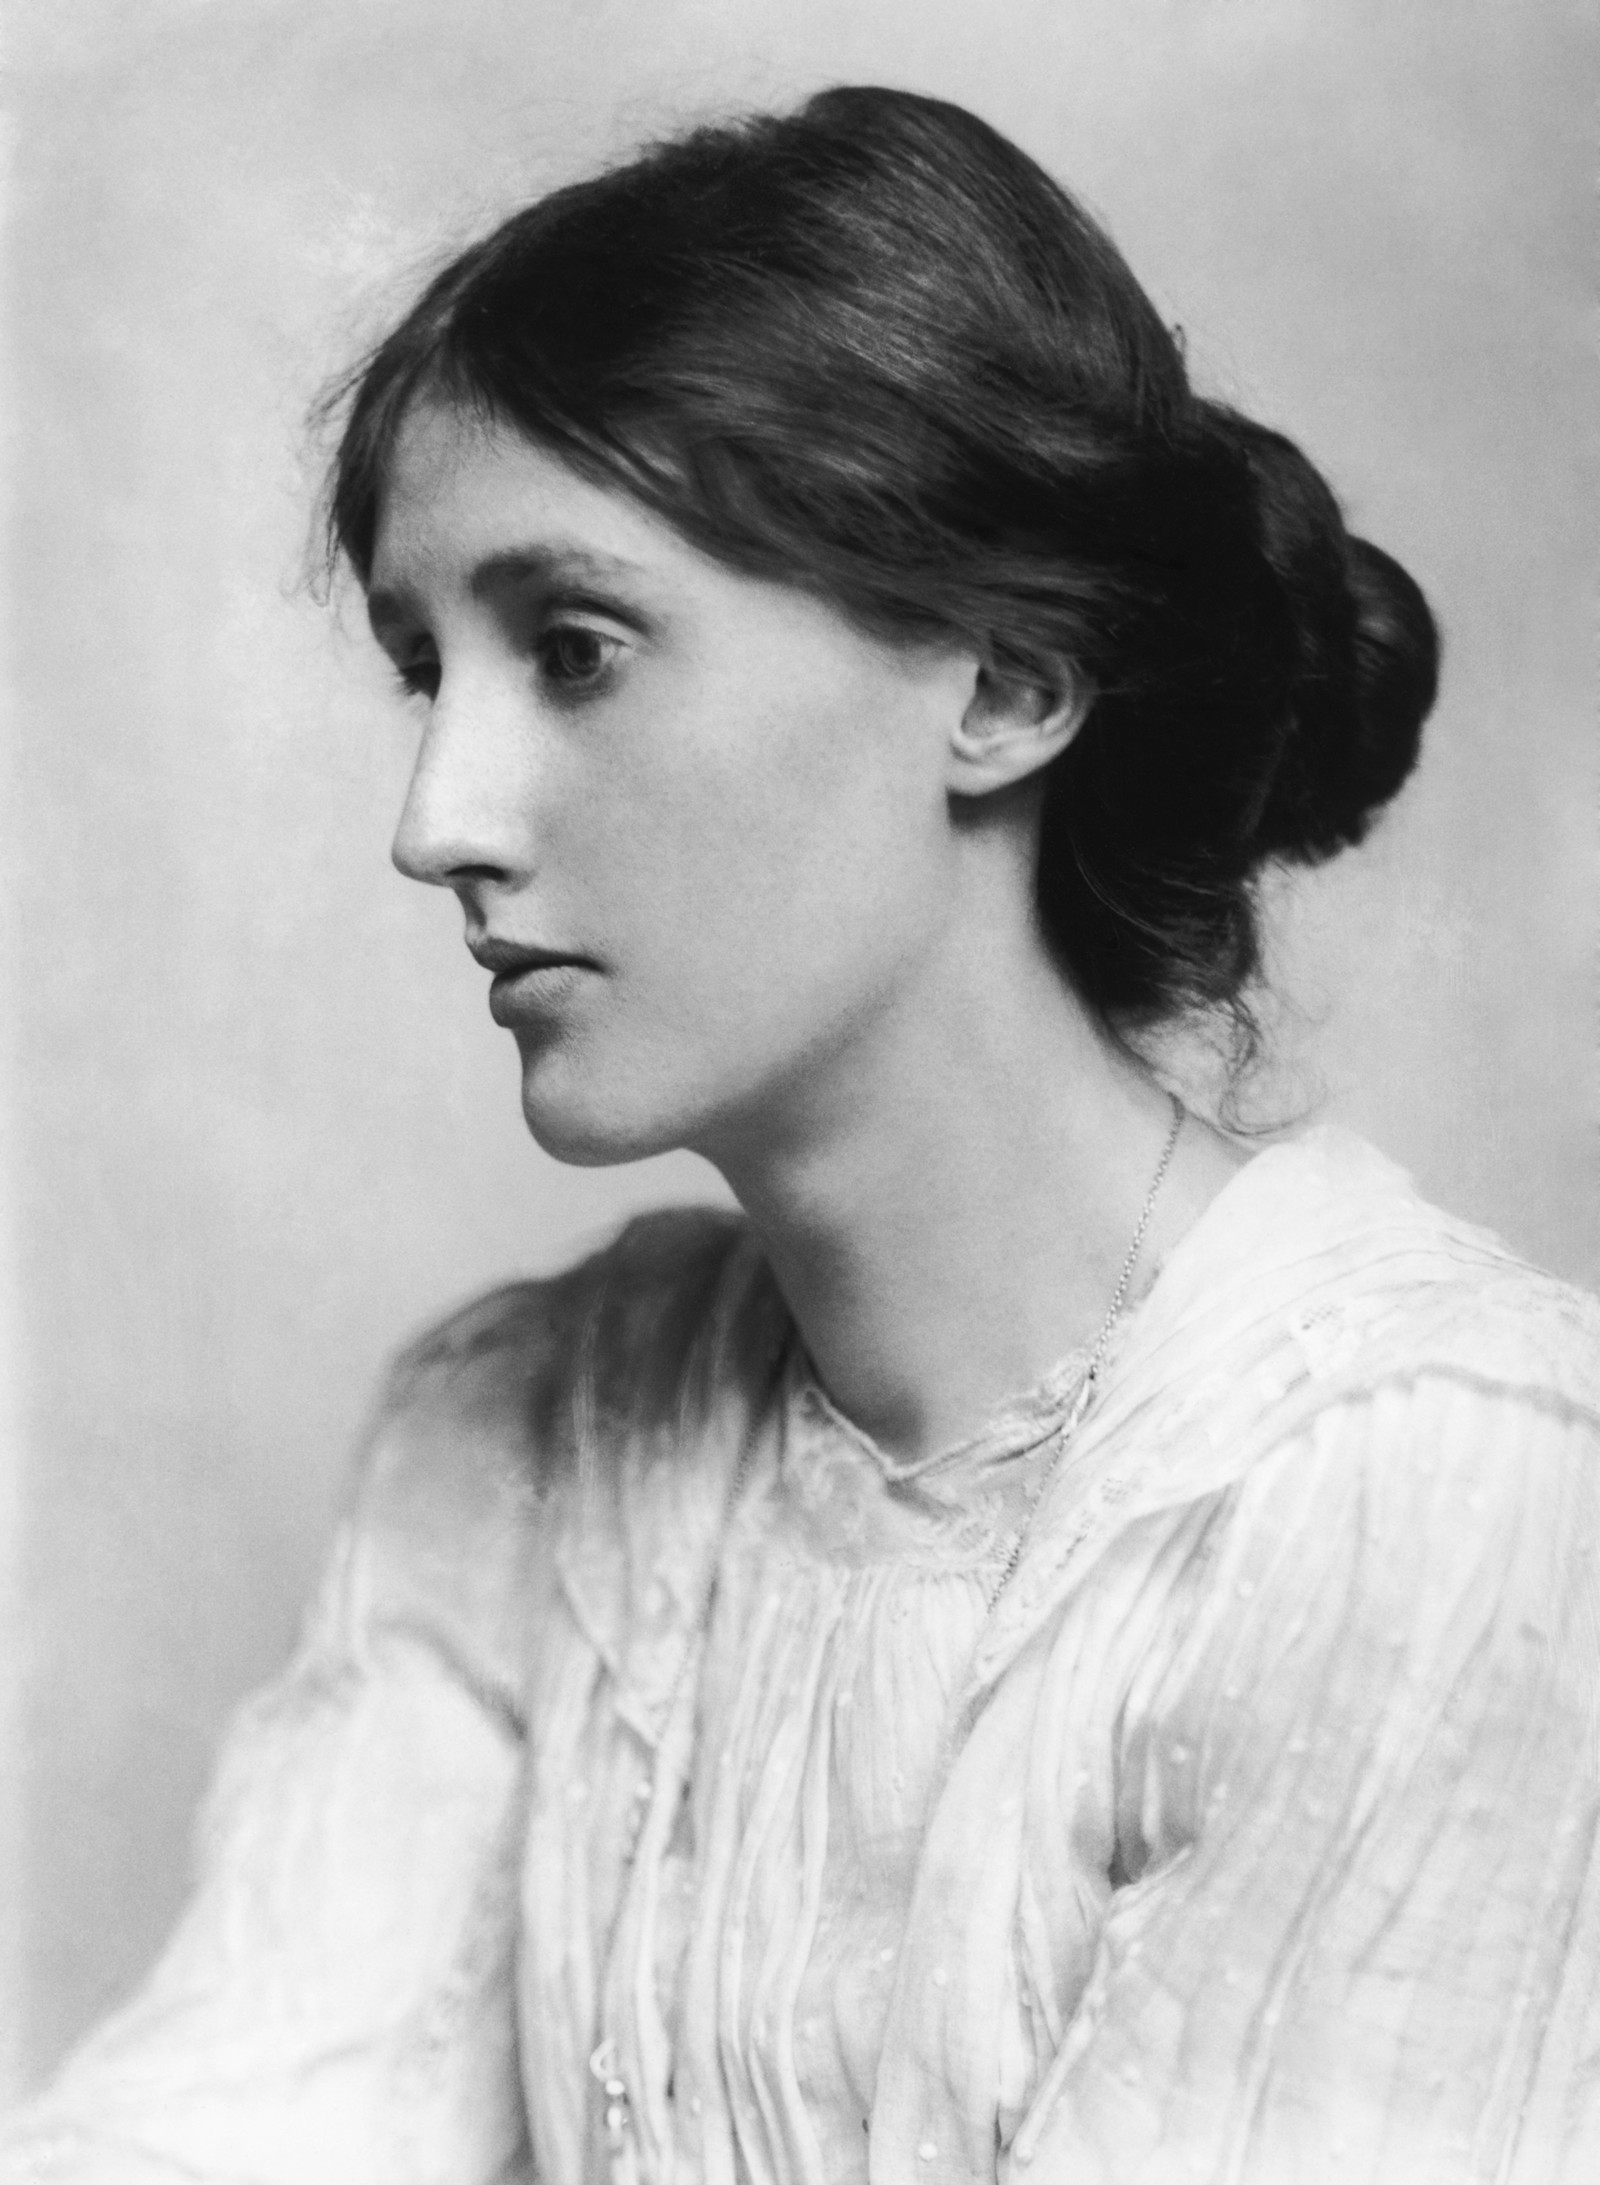 Virginia Woolf and the Literature of Loss at Colston Hall Foyer